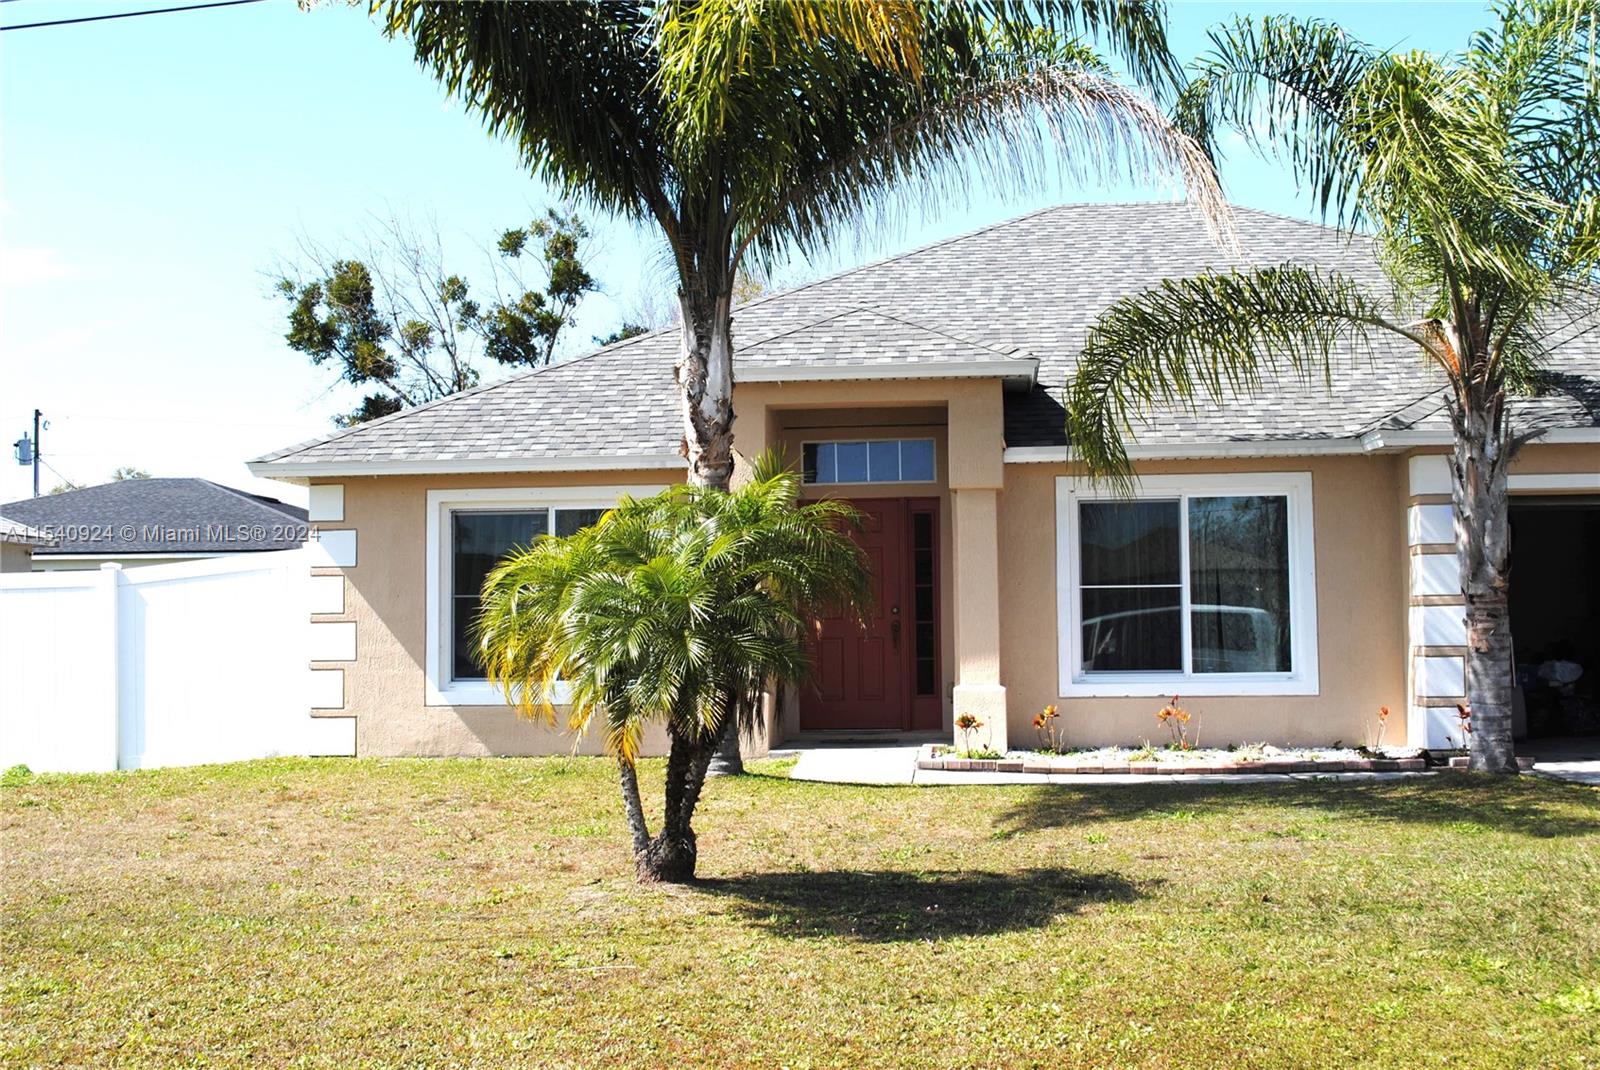 a front view of house with small garden and palm trees